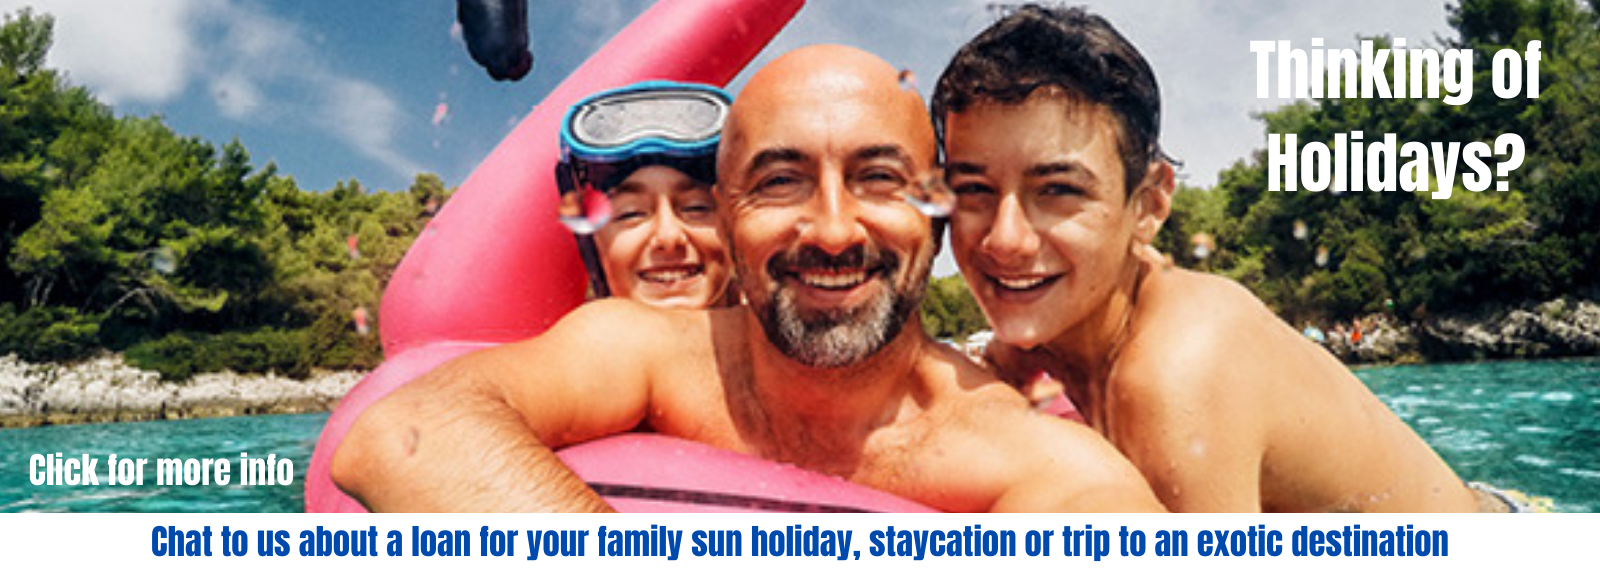 Blackrock Credit Union image promoting holiday loans showing happy family enjoying sun holiday in the water